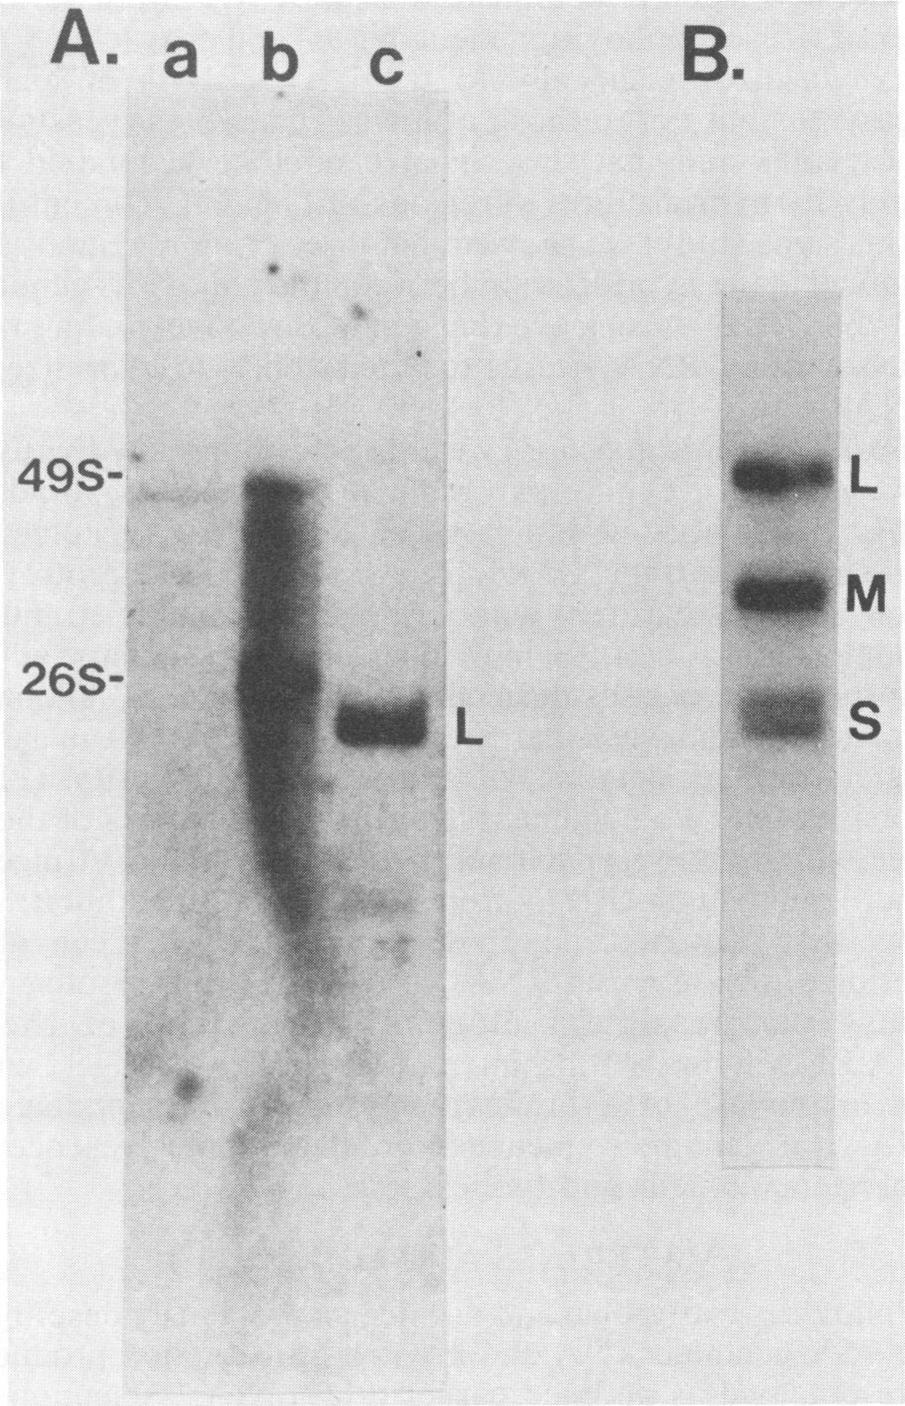 Four identical cytoplasmic RNA samples (lanes a, c, e, and g) and four identical poliovirus RNA samples (lanes b, d, f, and h), each containing -200 ng, were probed with the labeled viral RNA probes